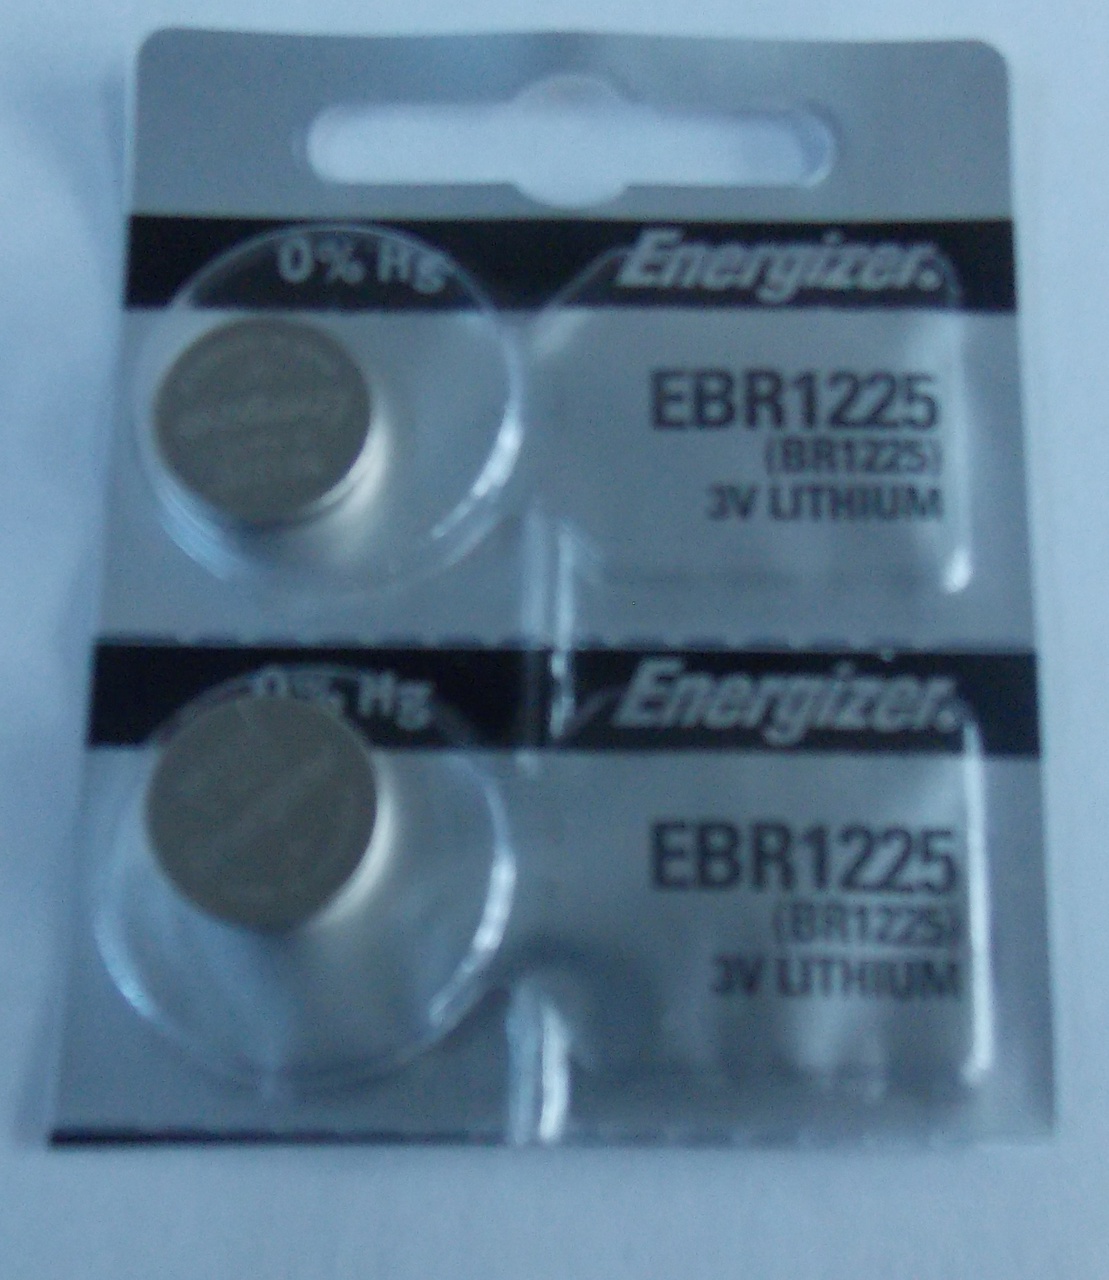 Energizer CR1225 3V Lithium Coin Battery - 2 Pack + FREE SHIPPING!